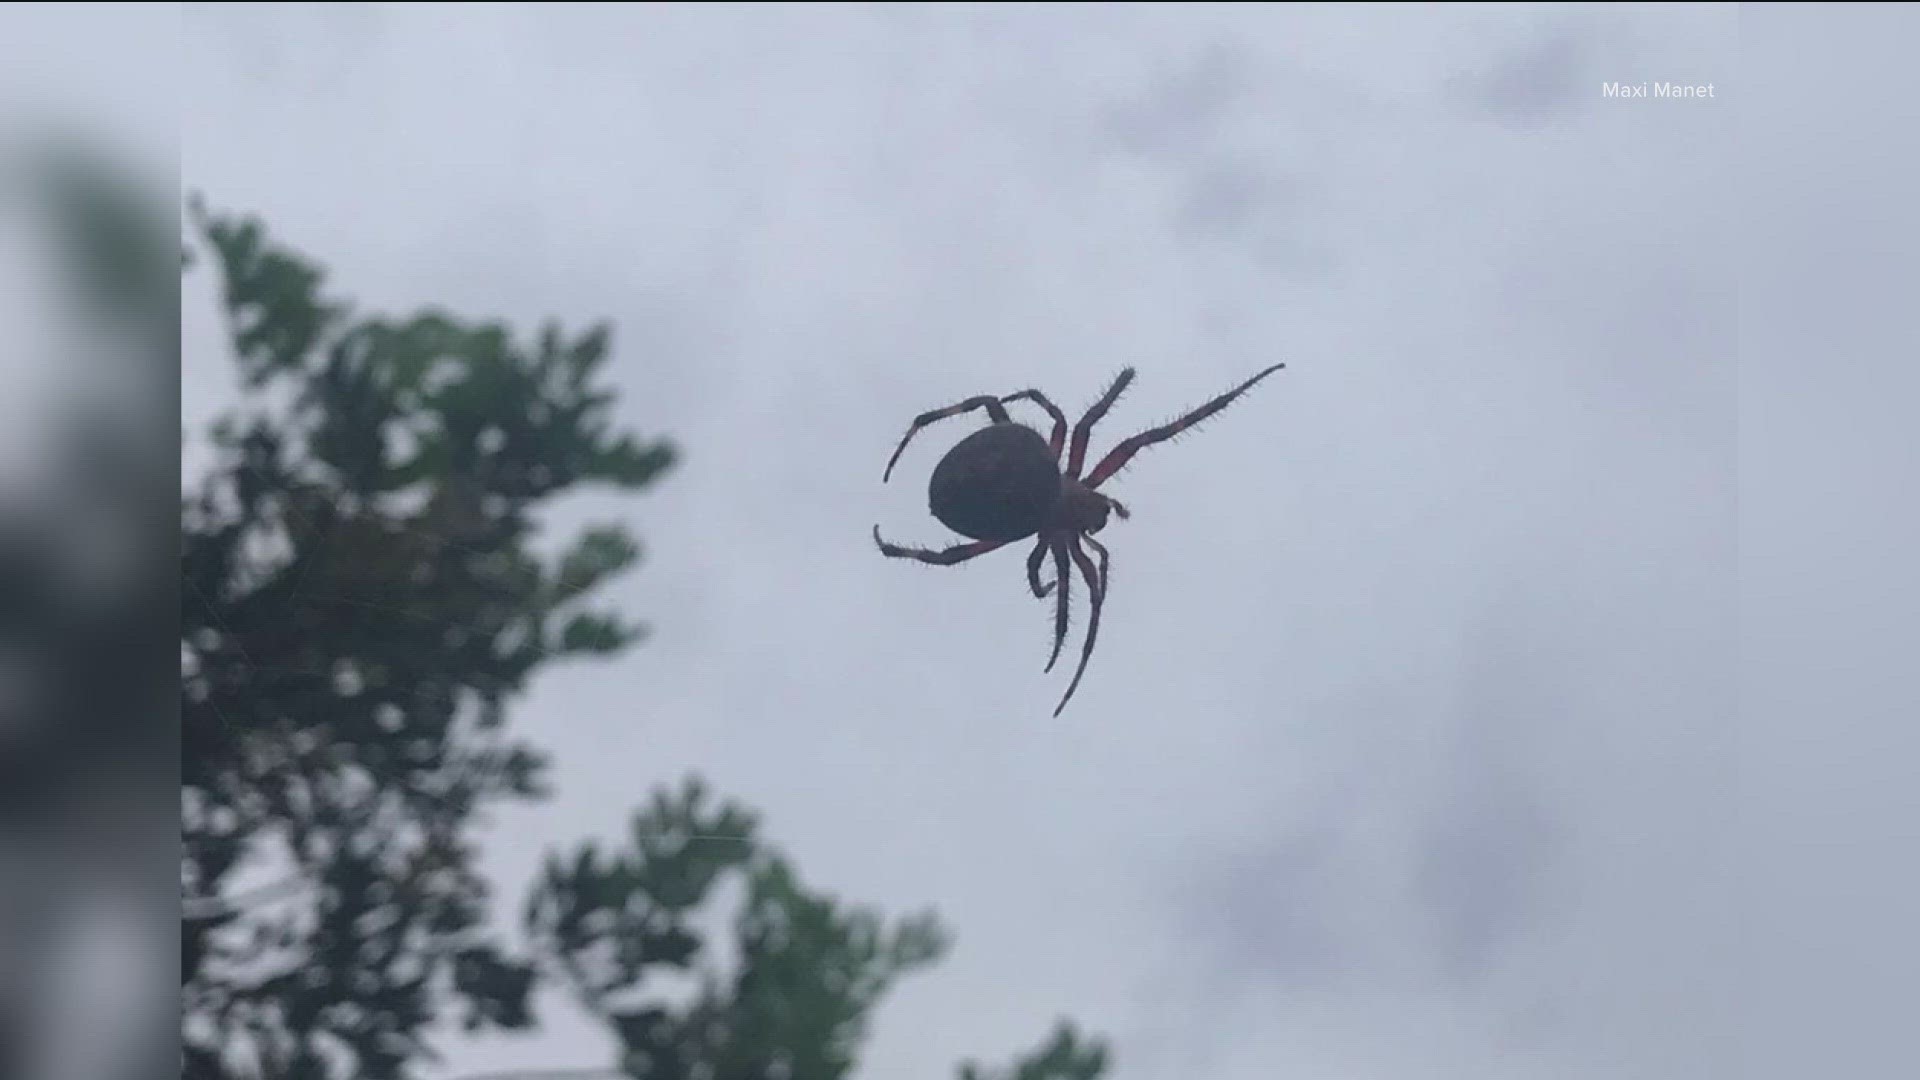 While big and scary, the good news is Orb Weaver spiders are typically harmless to humans, although they are venomous.